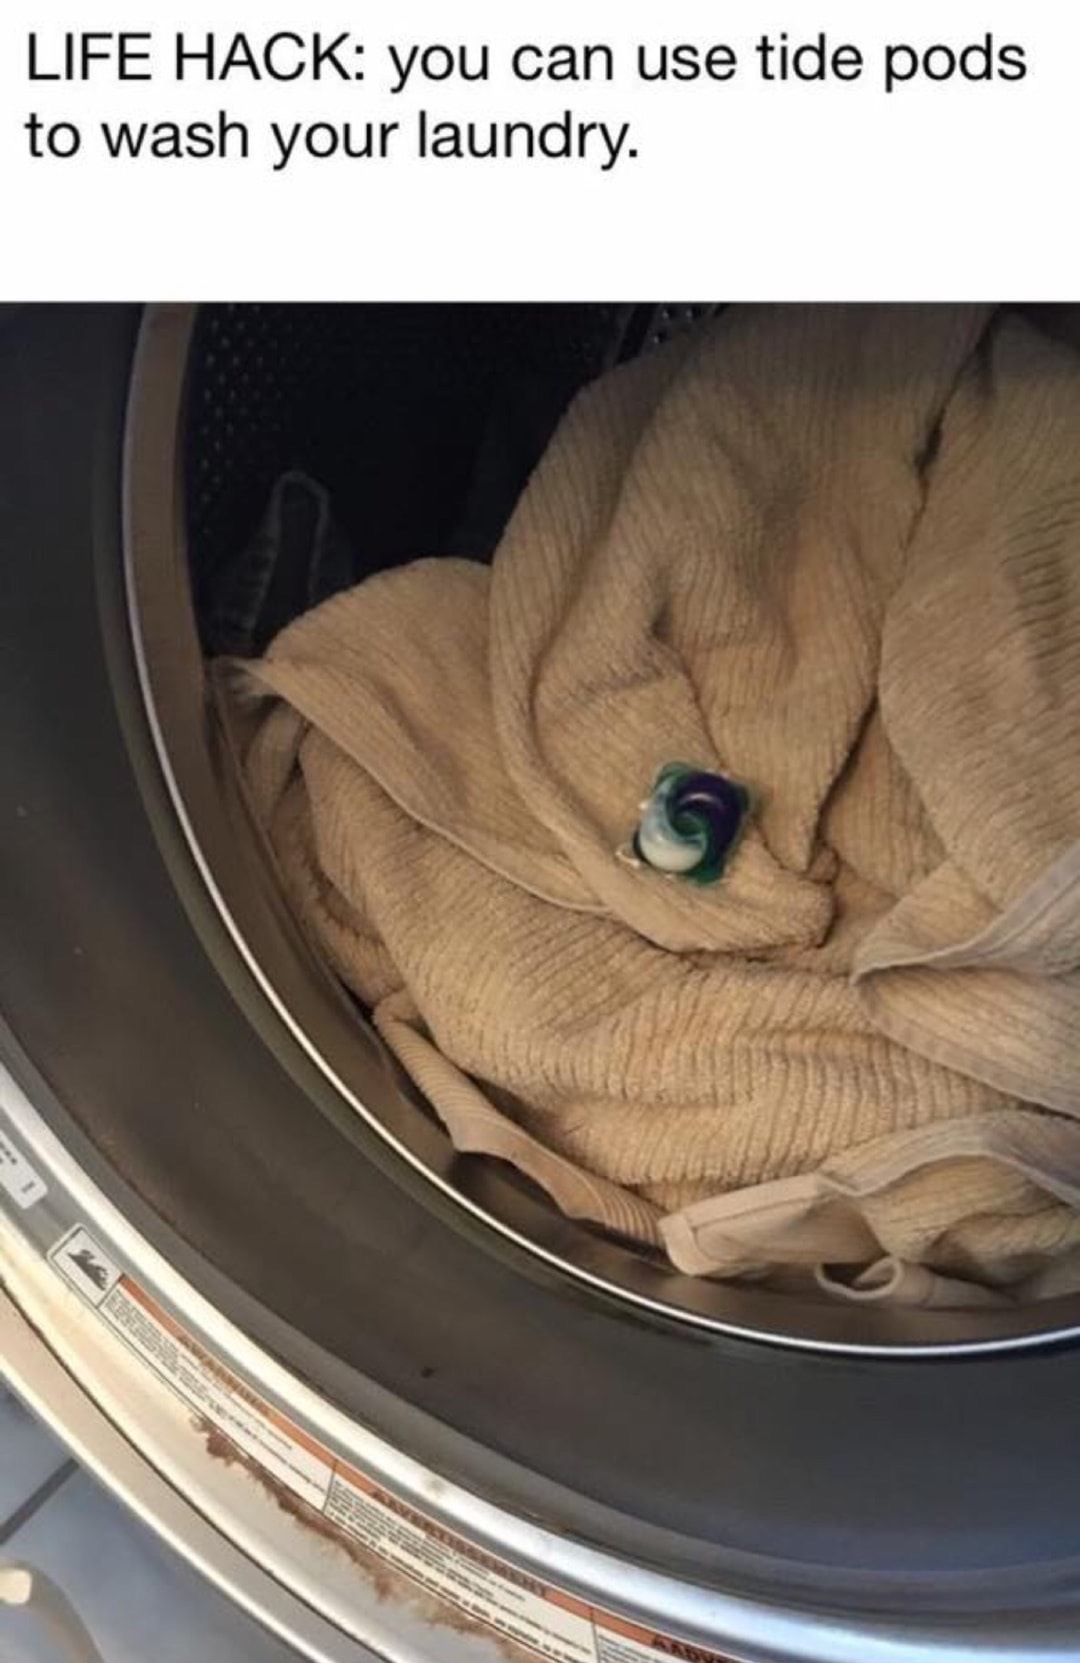 memes  - life hack you can use tide pods - Life Hack you can use tide pods to wash your laundry.